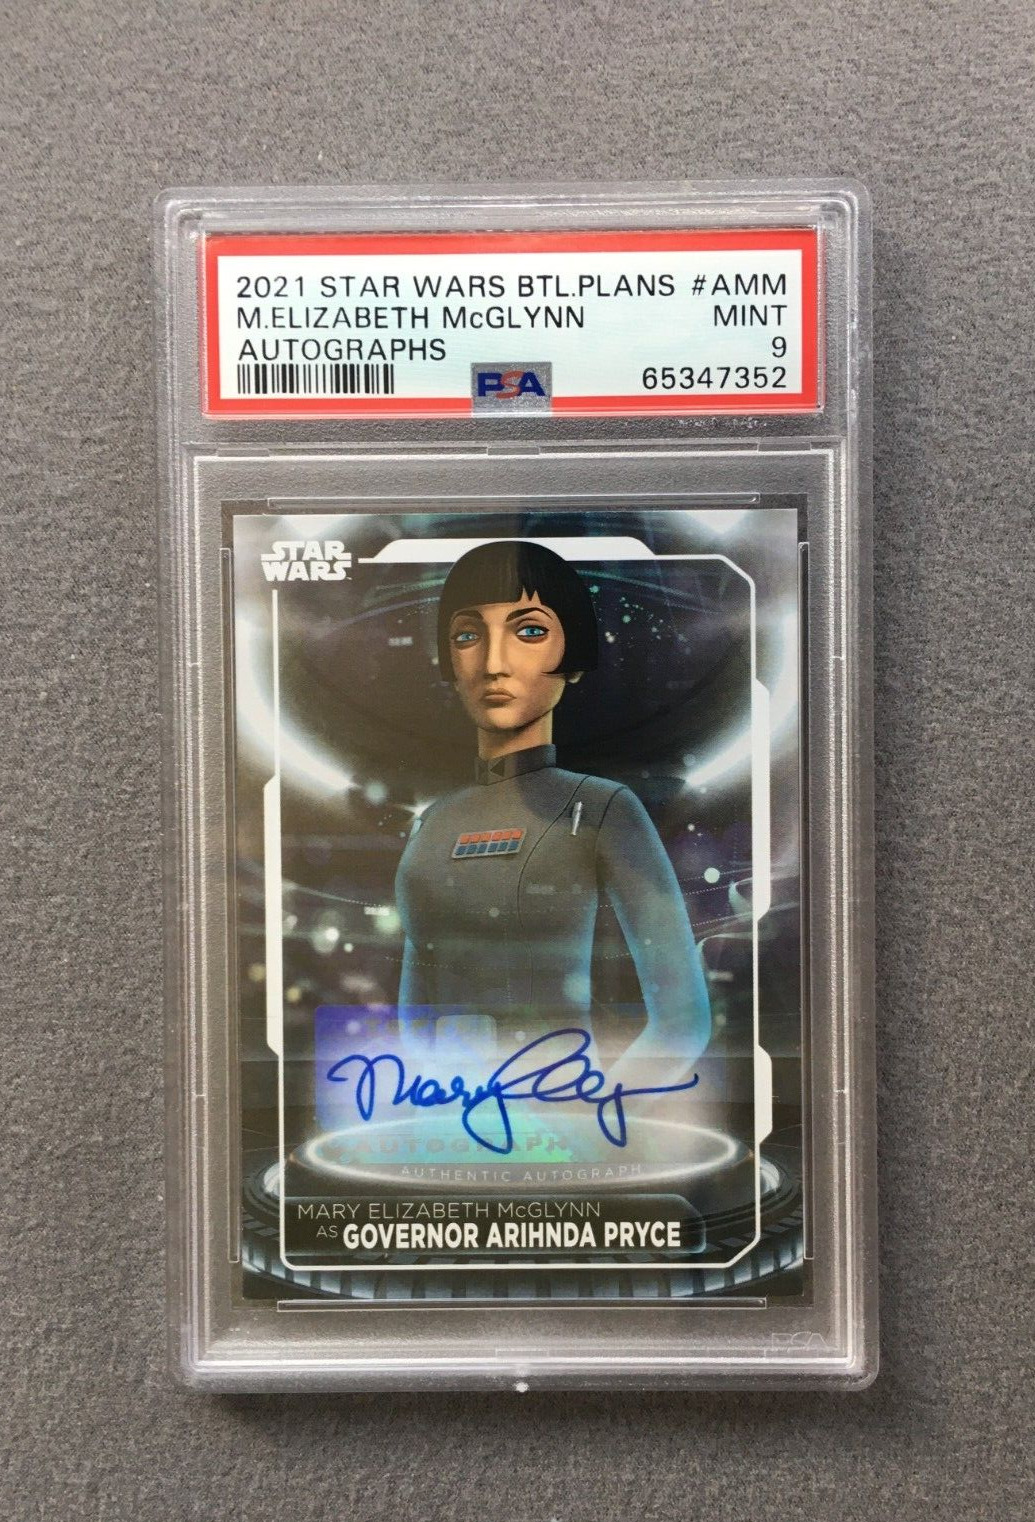 2021 Topps Star Wars Battle Plans Mary E. McGlynn as Governor Pryce Auto - PSA 9